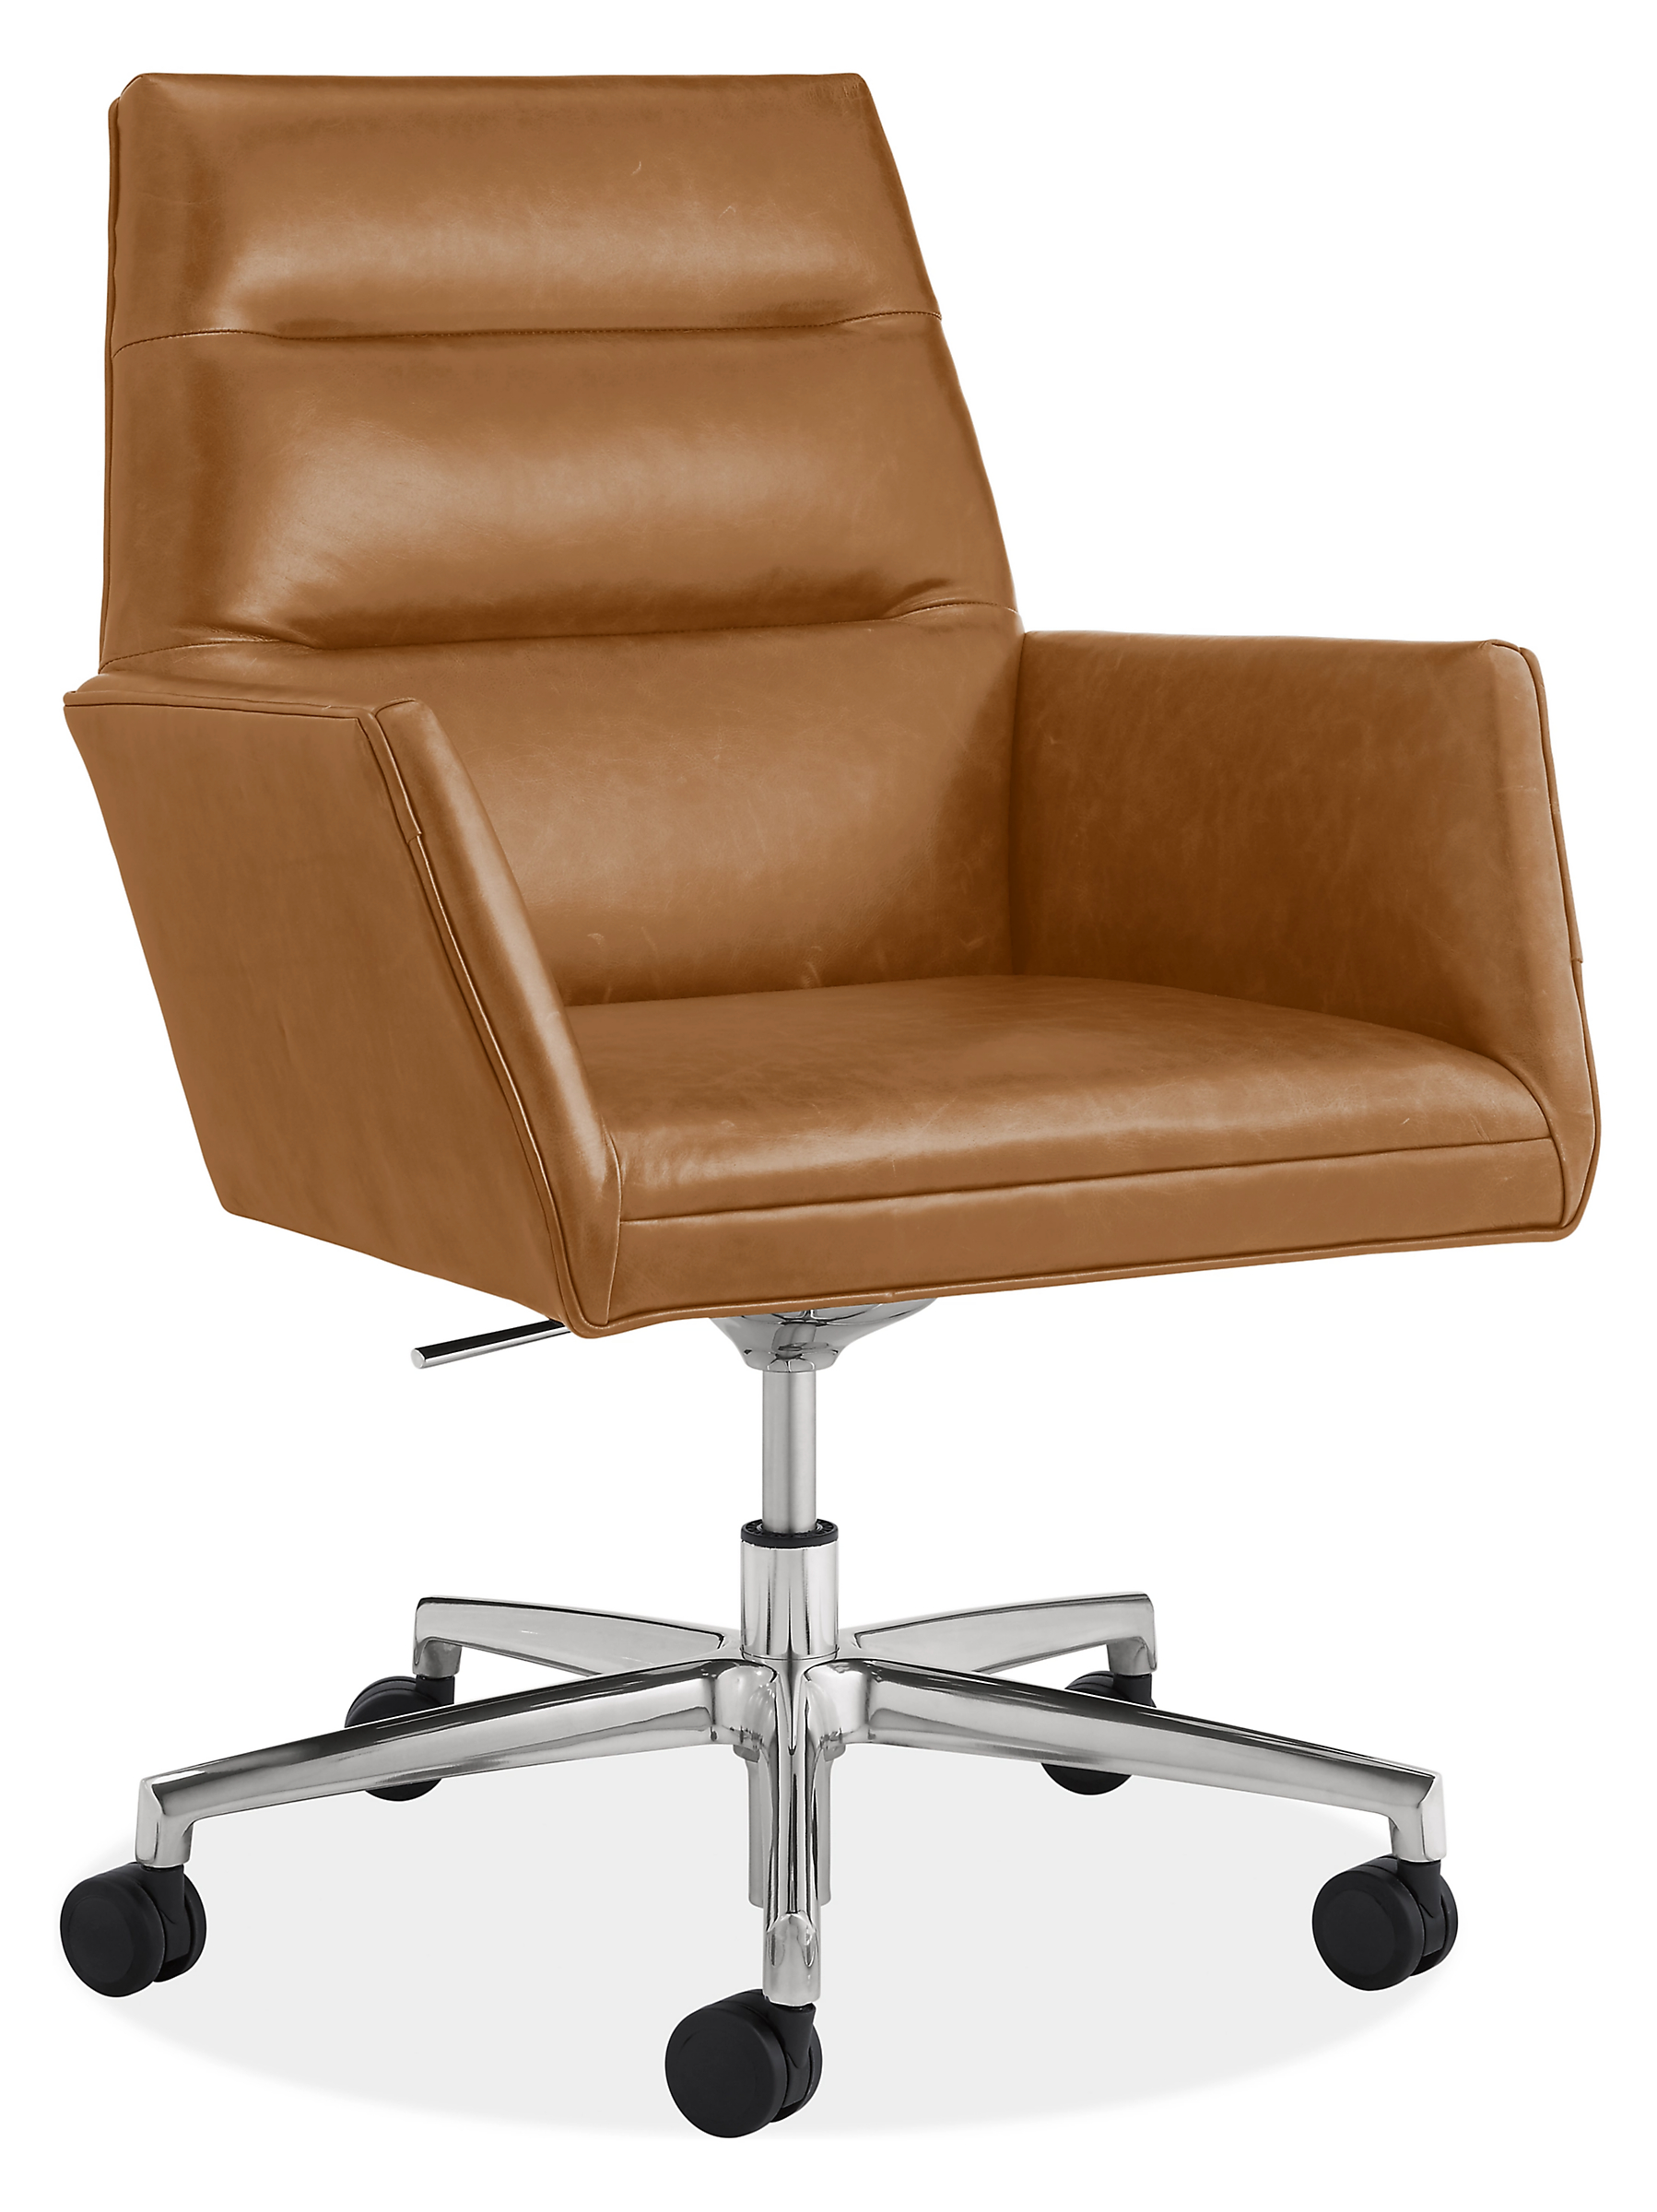 Tenley Office Chair in Lecco Camel Leather